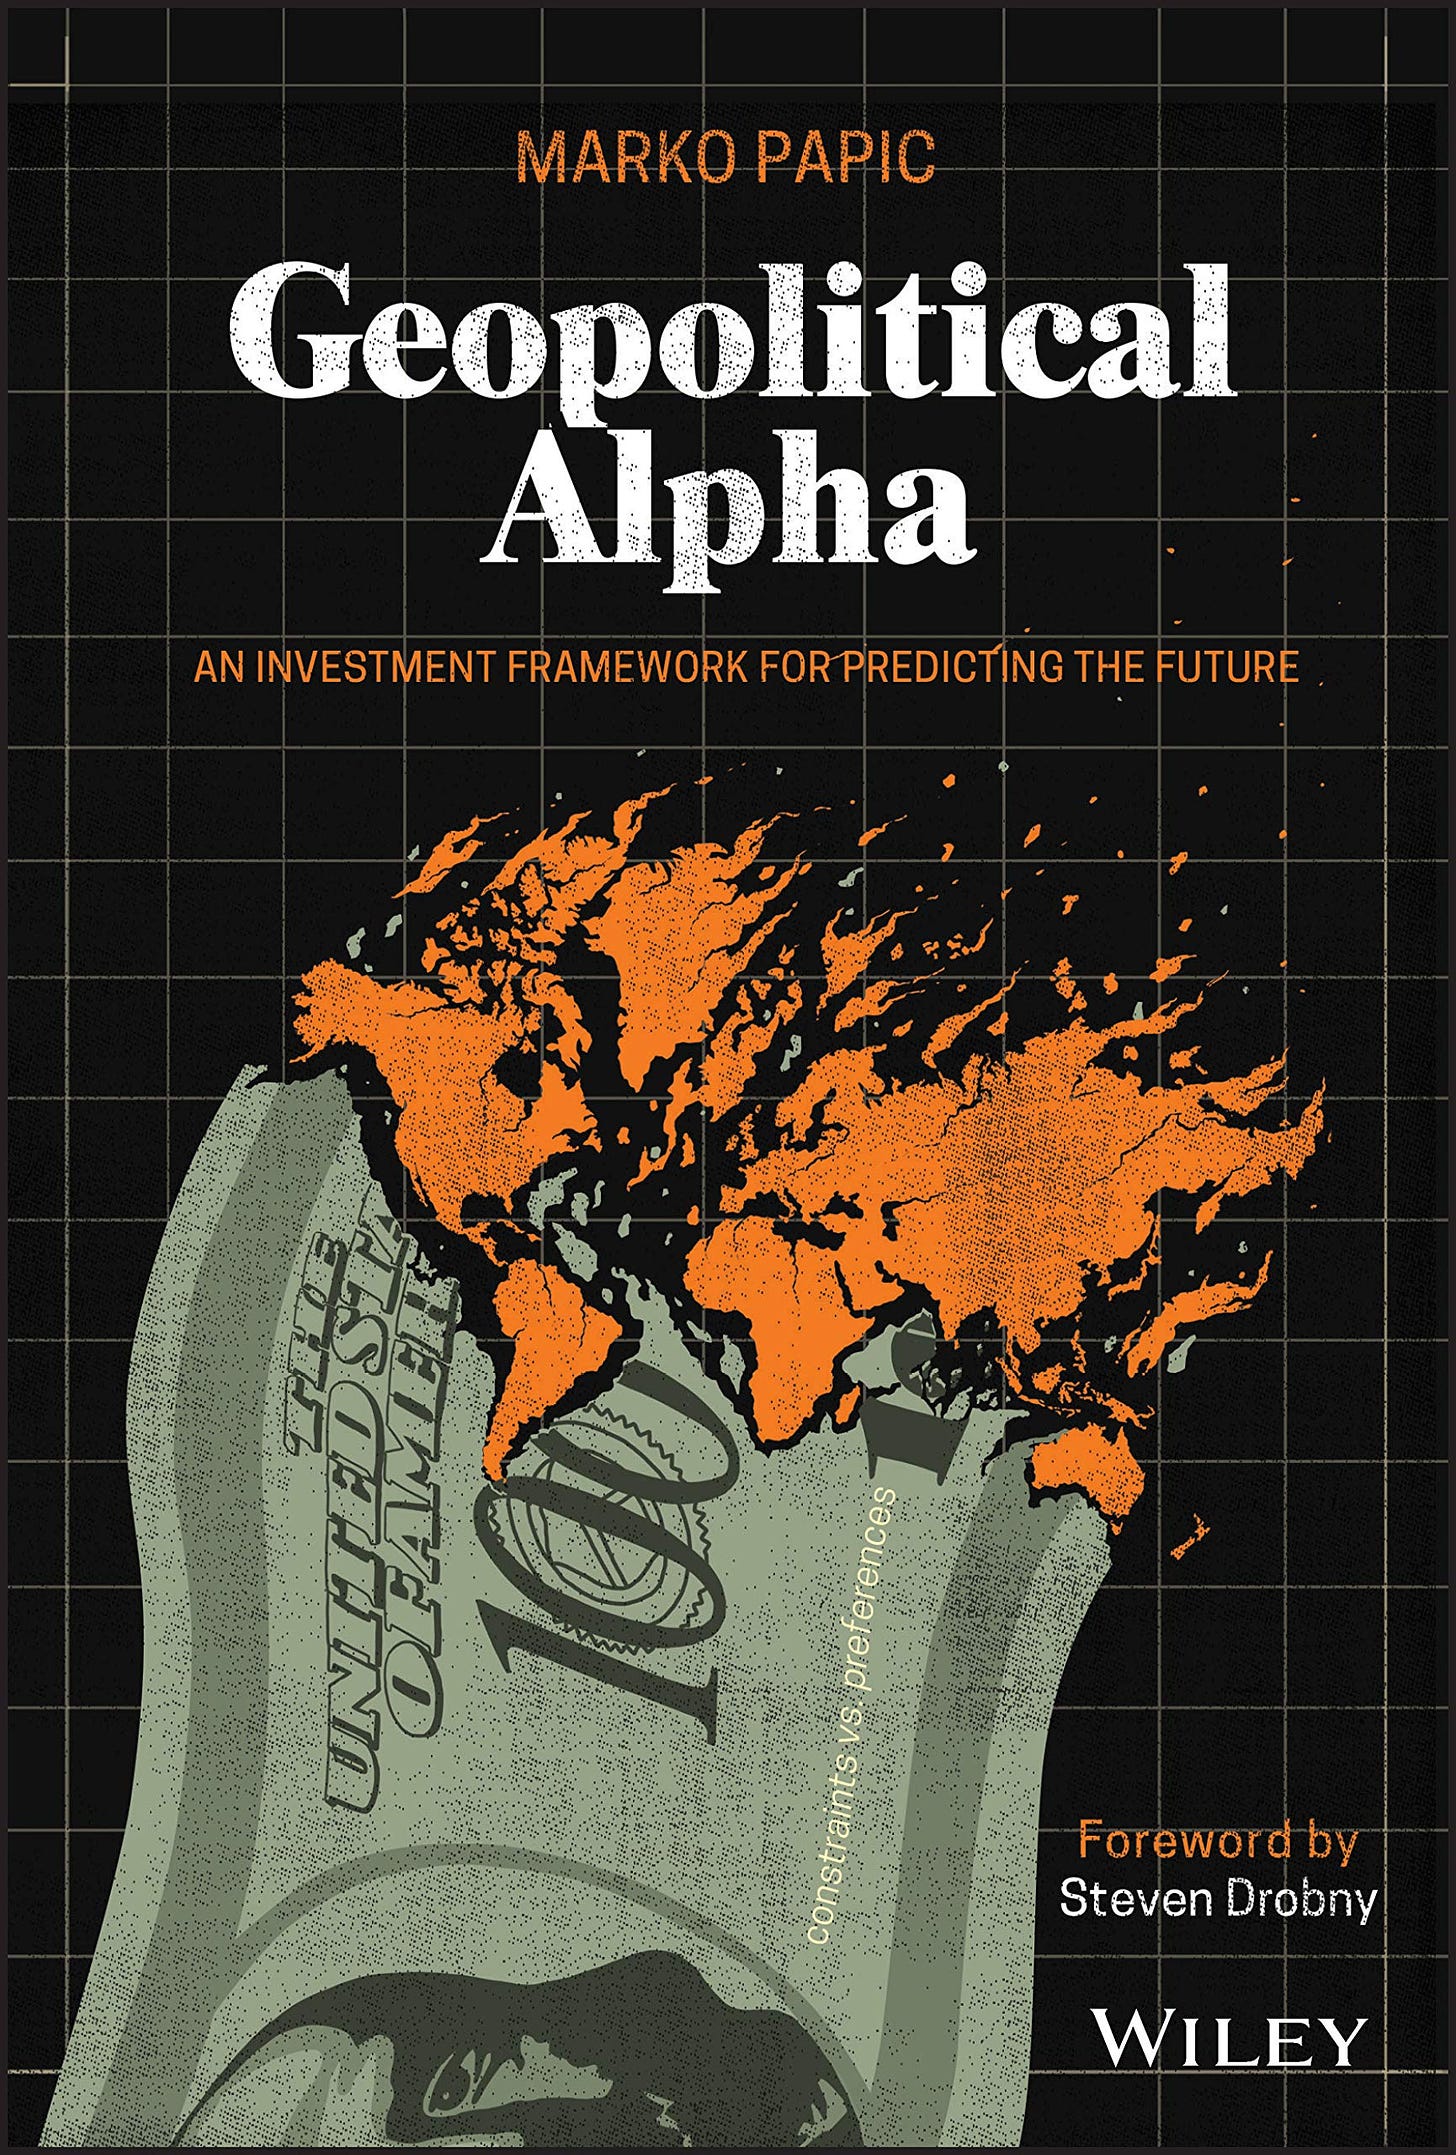 Geopolitical Alpha: An Investment Framework for Predicting the Future:  Amazon.co.uk: Papic, Marko, Drobny, Steven: 9781119740216: Books